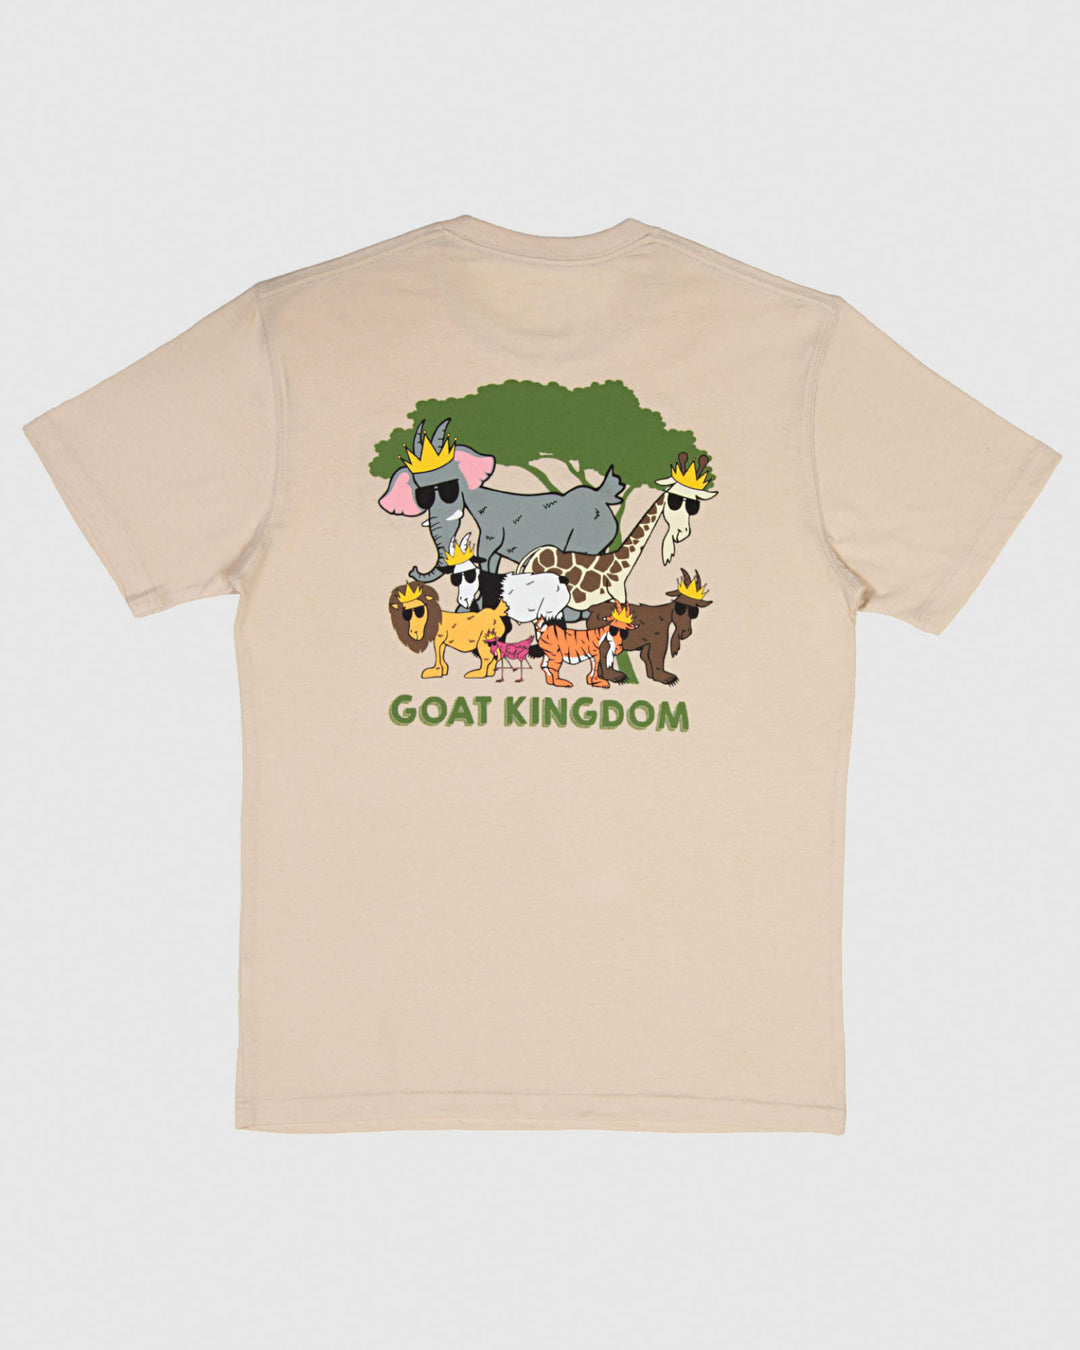 Sandshell-colored t-shirt with animals design